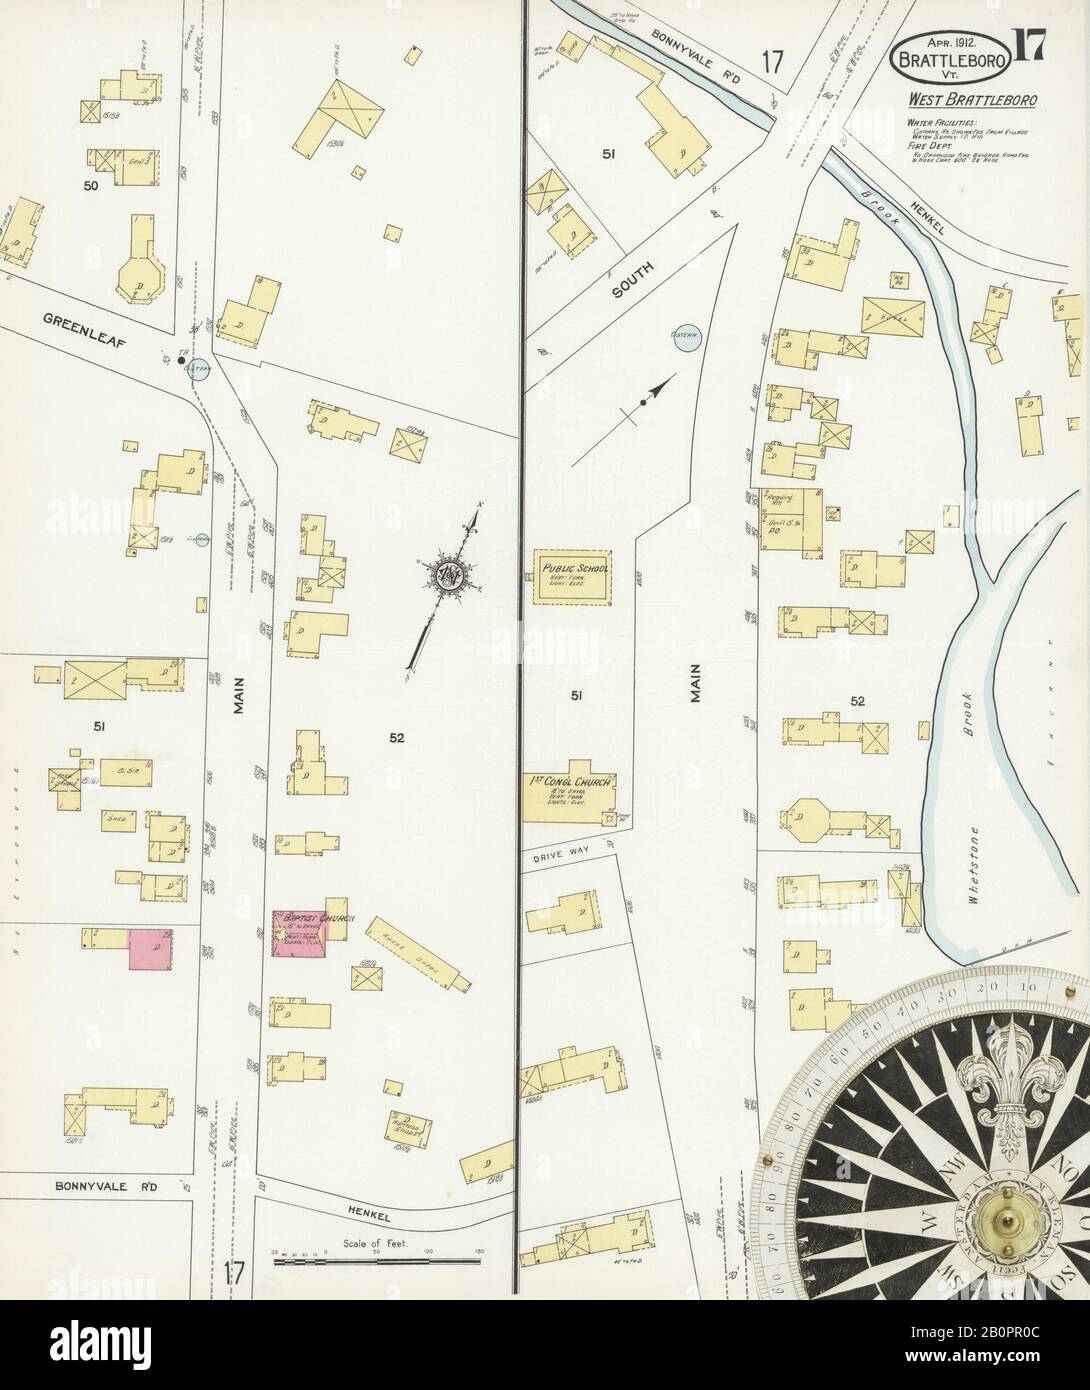 Image 17 of Sanborn Fire Insurance Map from Brattleboro, Windham County, Vermont. Apr 1912. 17 Sheet(s), America, street map with a Nineteenth Century compass Stock Photo